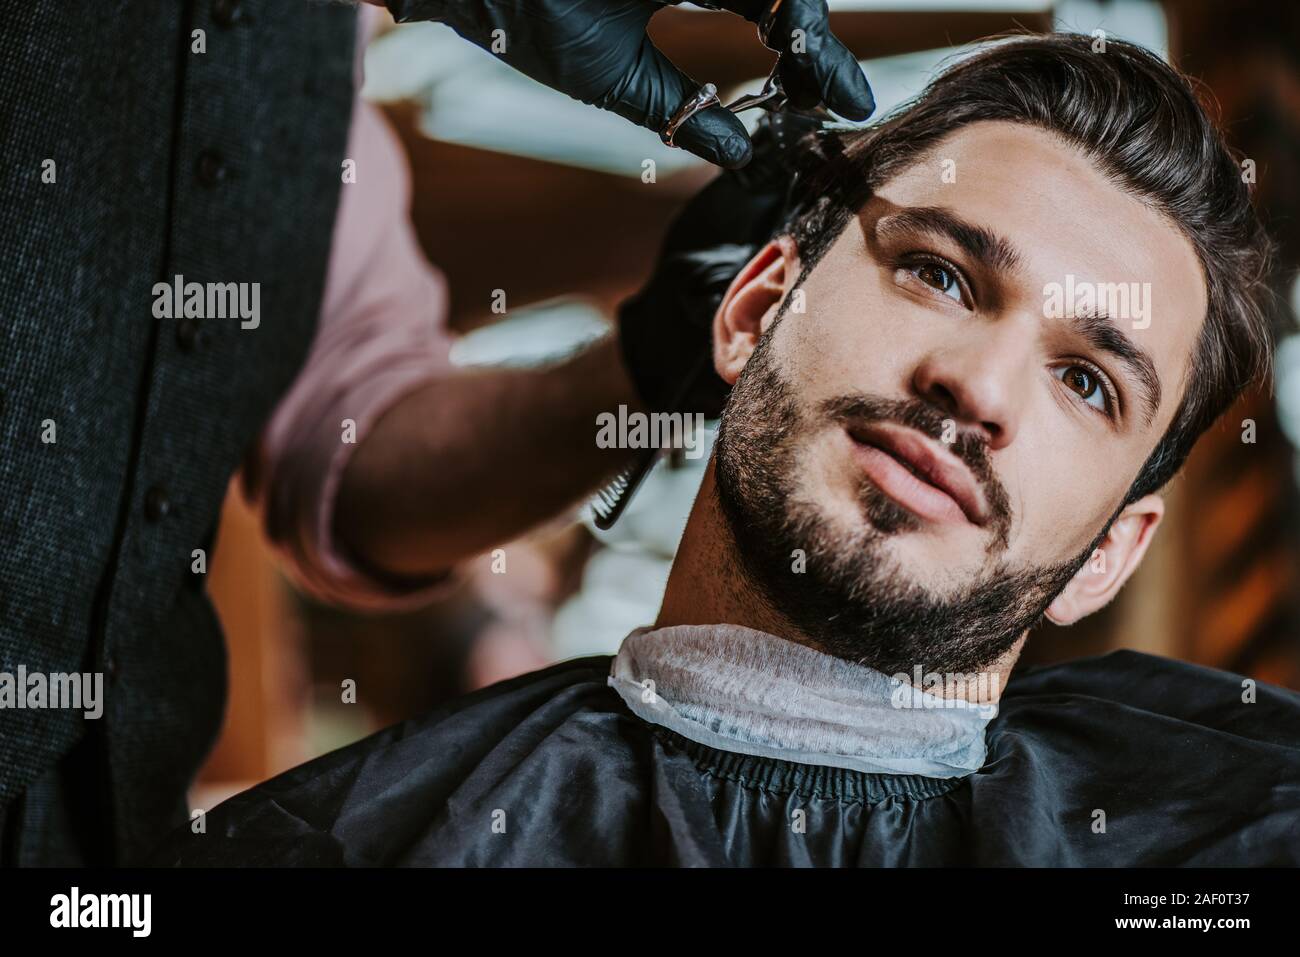 selective focus of barber in latex gloves holding scissors while styling hair of man Stock Photo